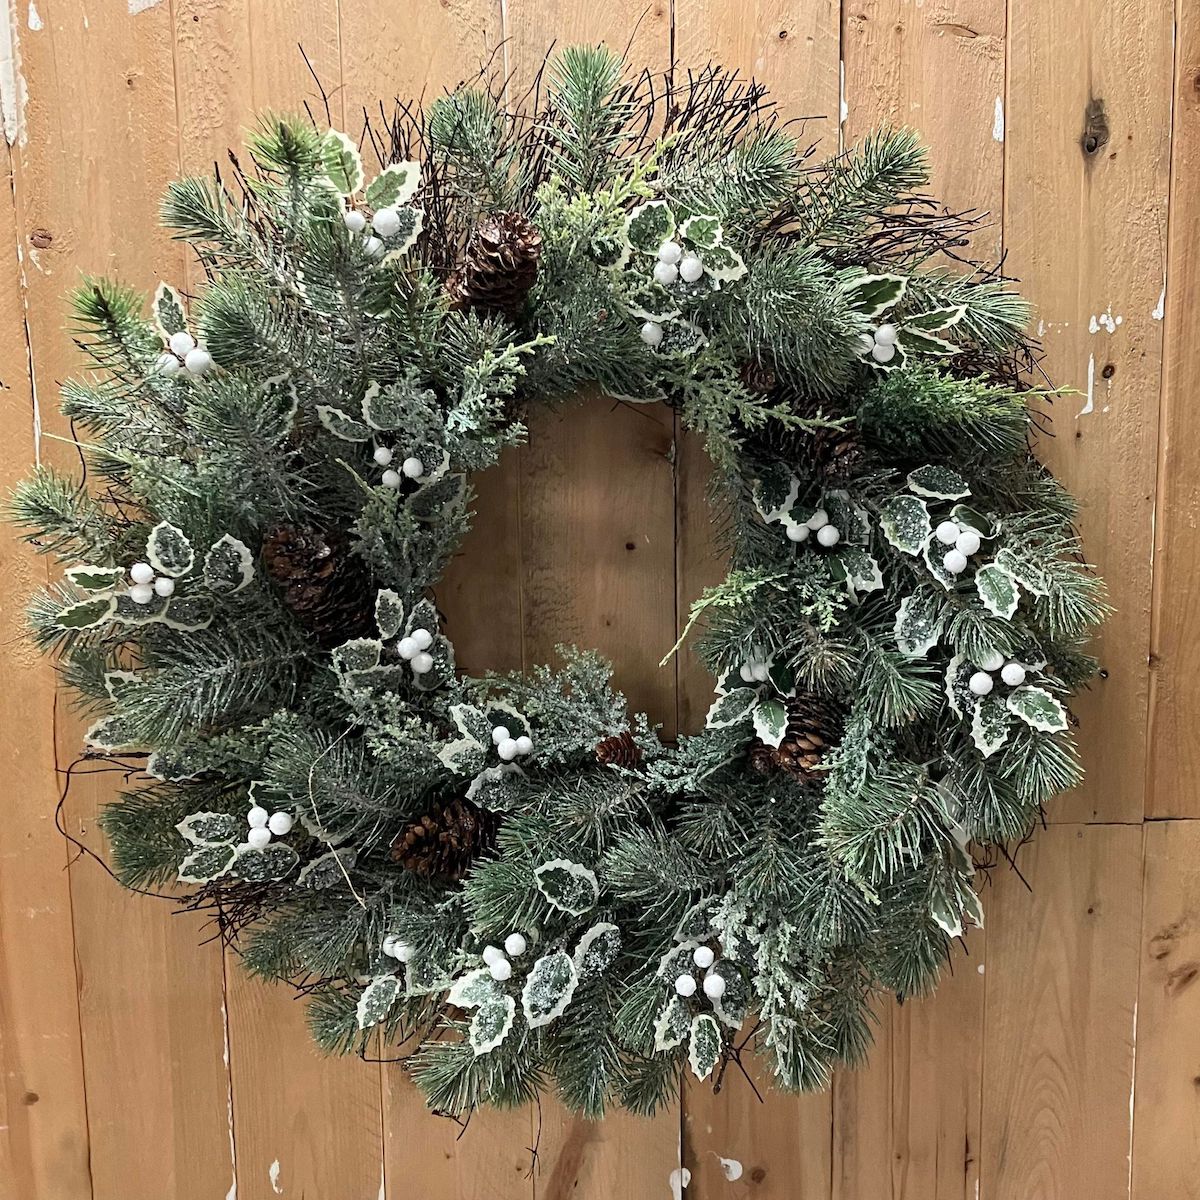 Iced Oxford PIne and Berries Large Wreath